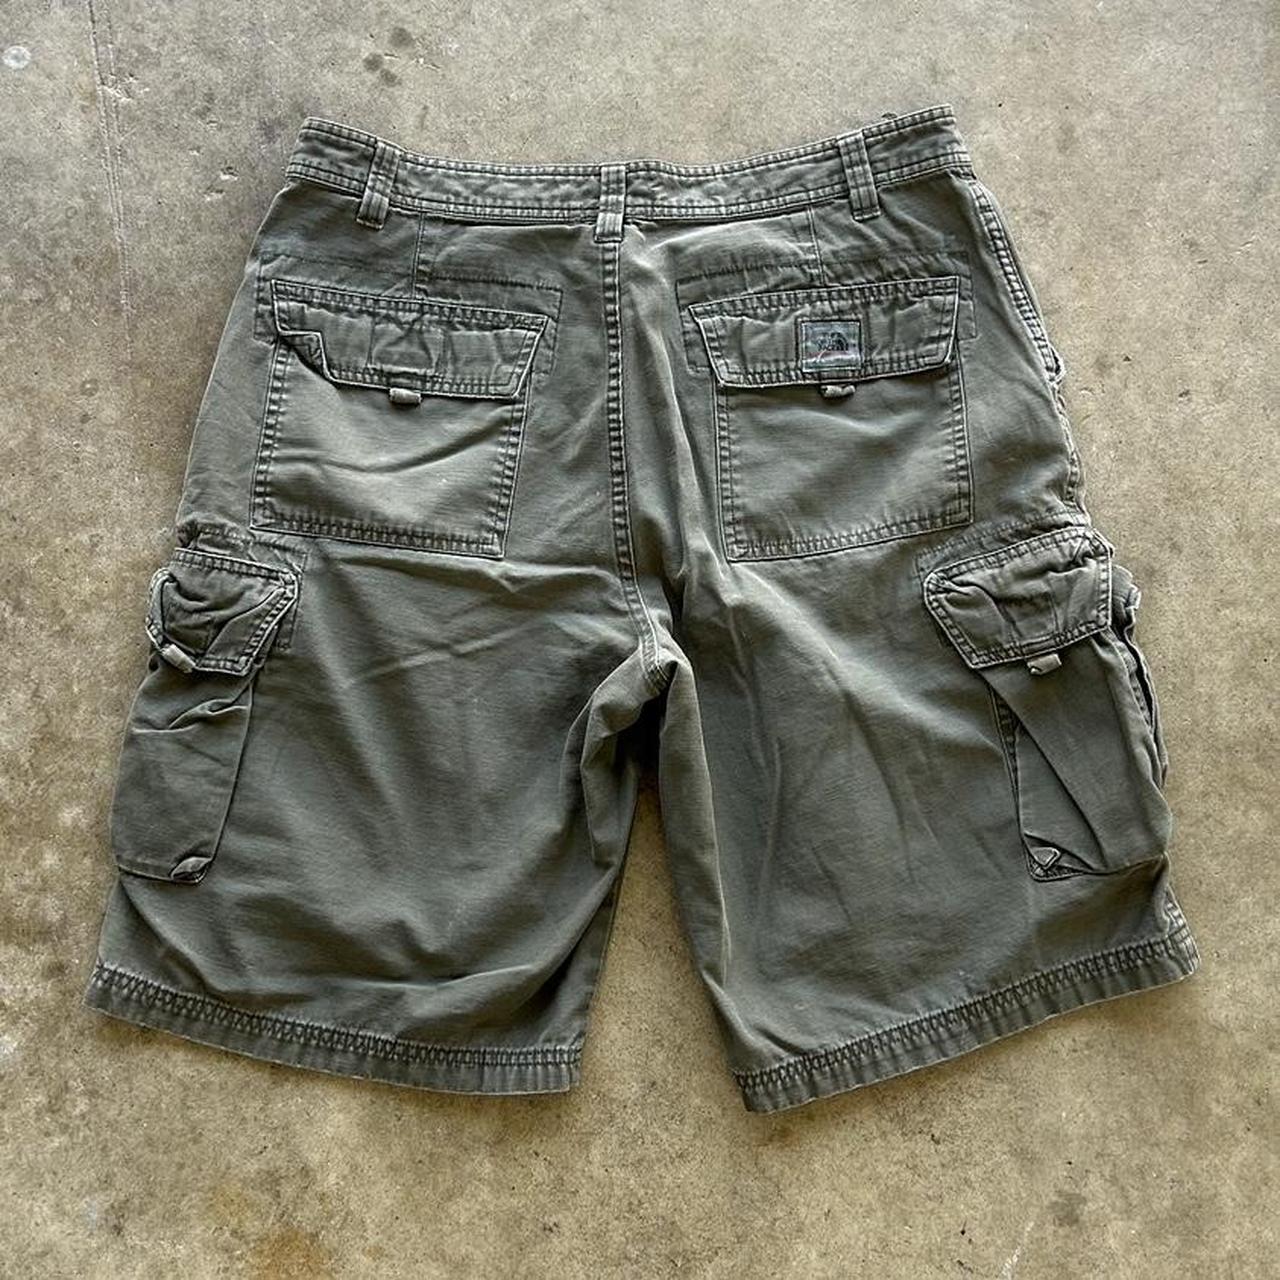 North Face A5 Series Cargo shorts Size 36